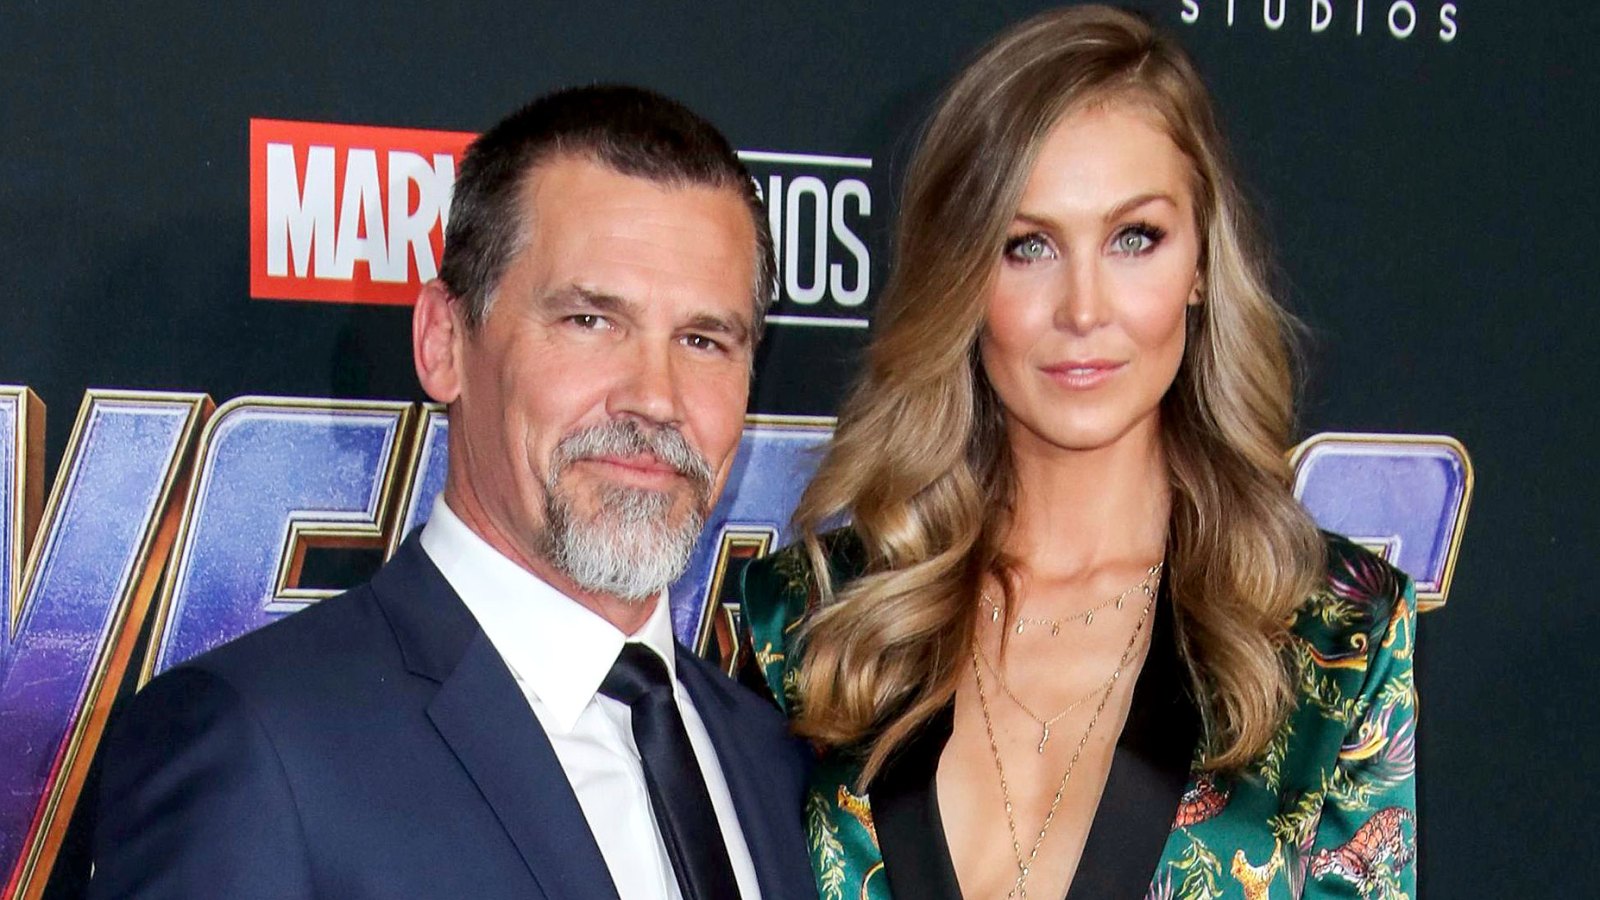 Josh Brolin Claps Back After Troll Disses Intimate Photo of His Wife Kathryn Boyd